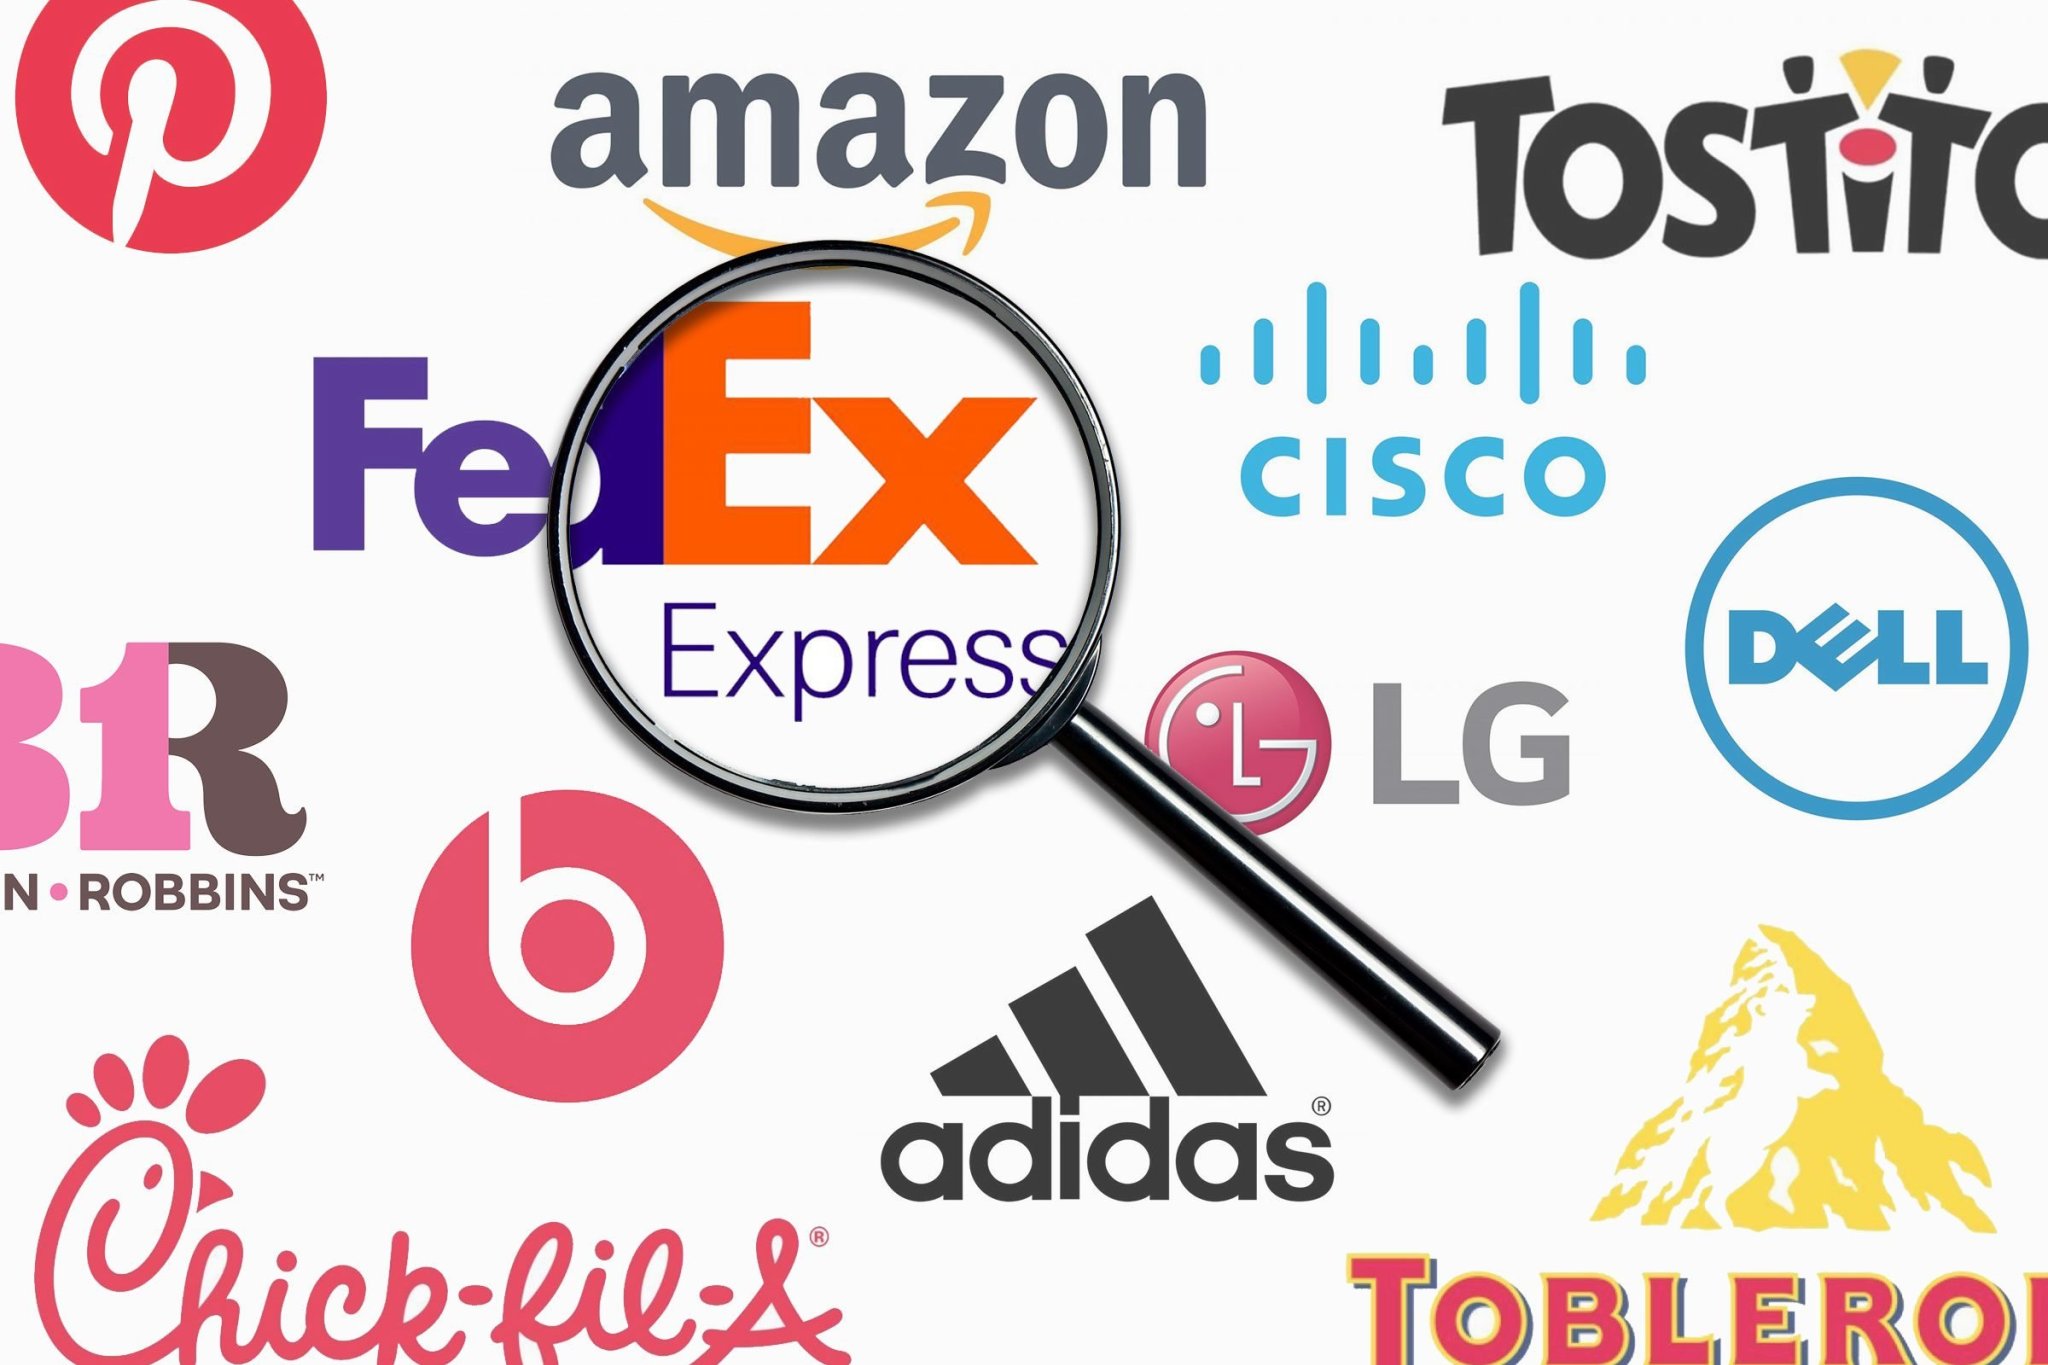 36 Hidden Messages in Company Logos You See All the Time